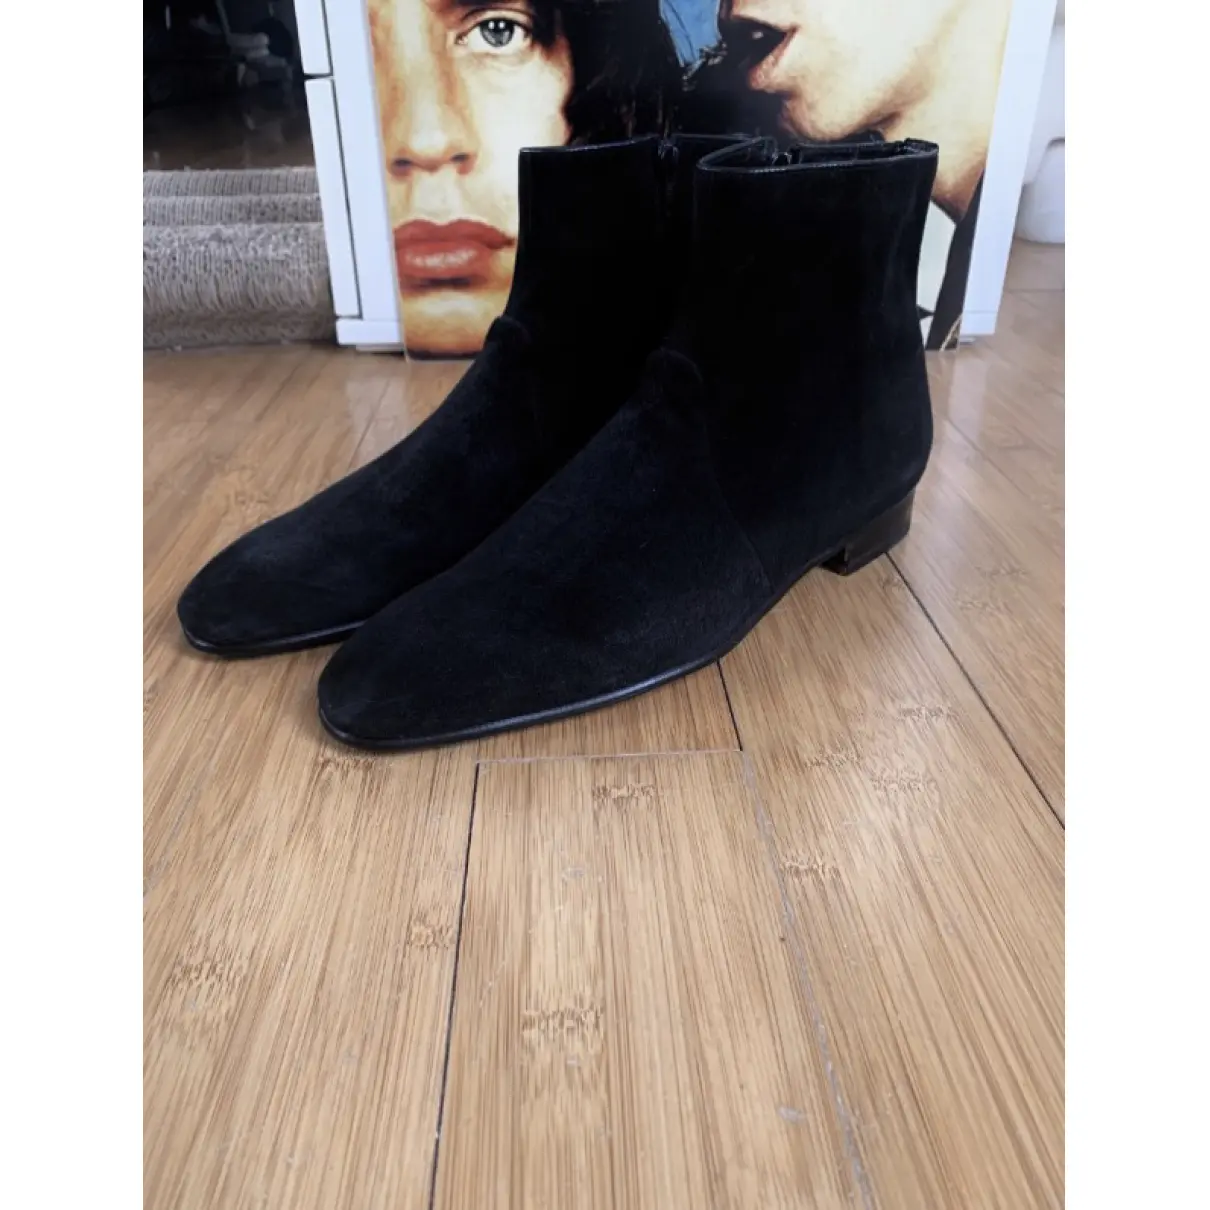 Buy Carvil Boots online